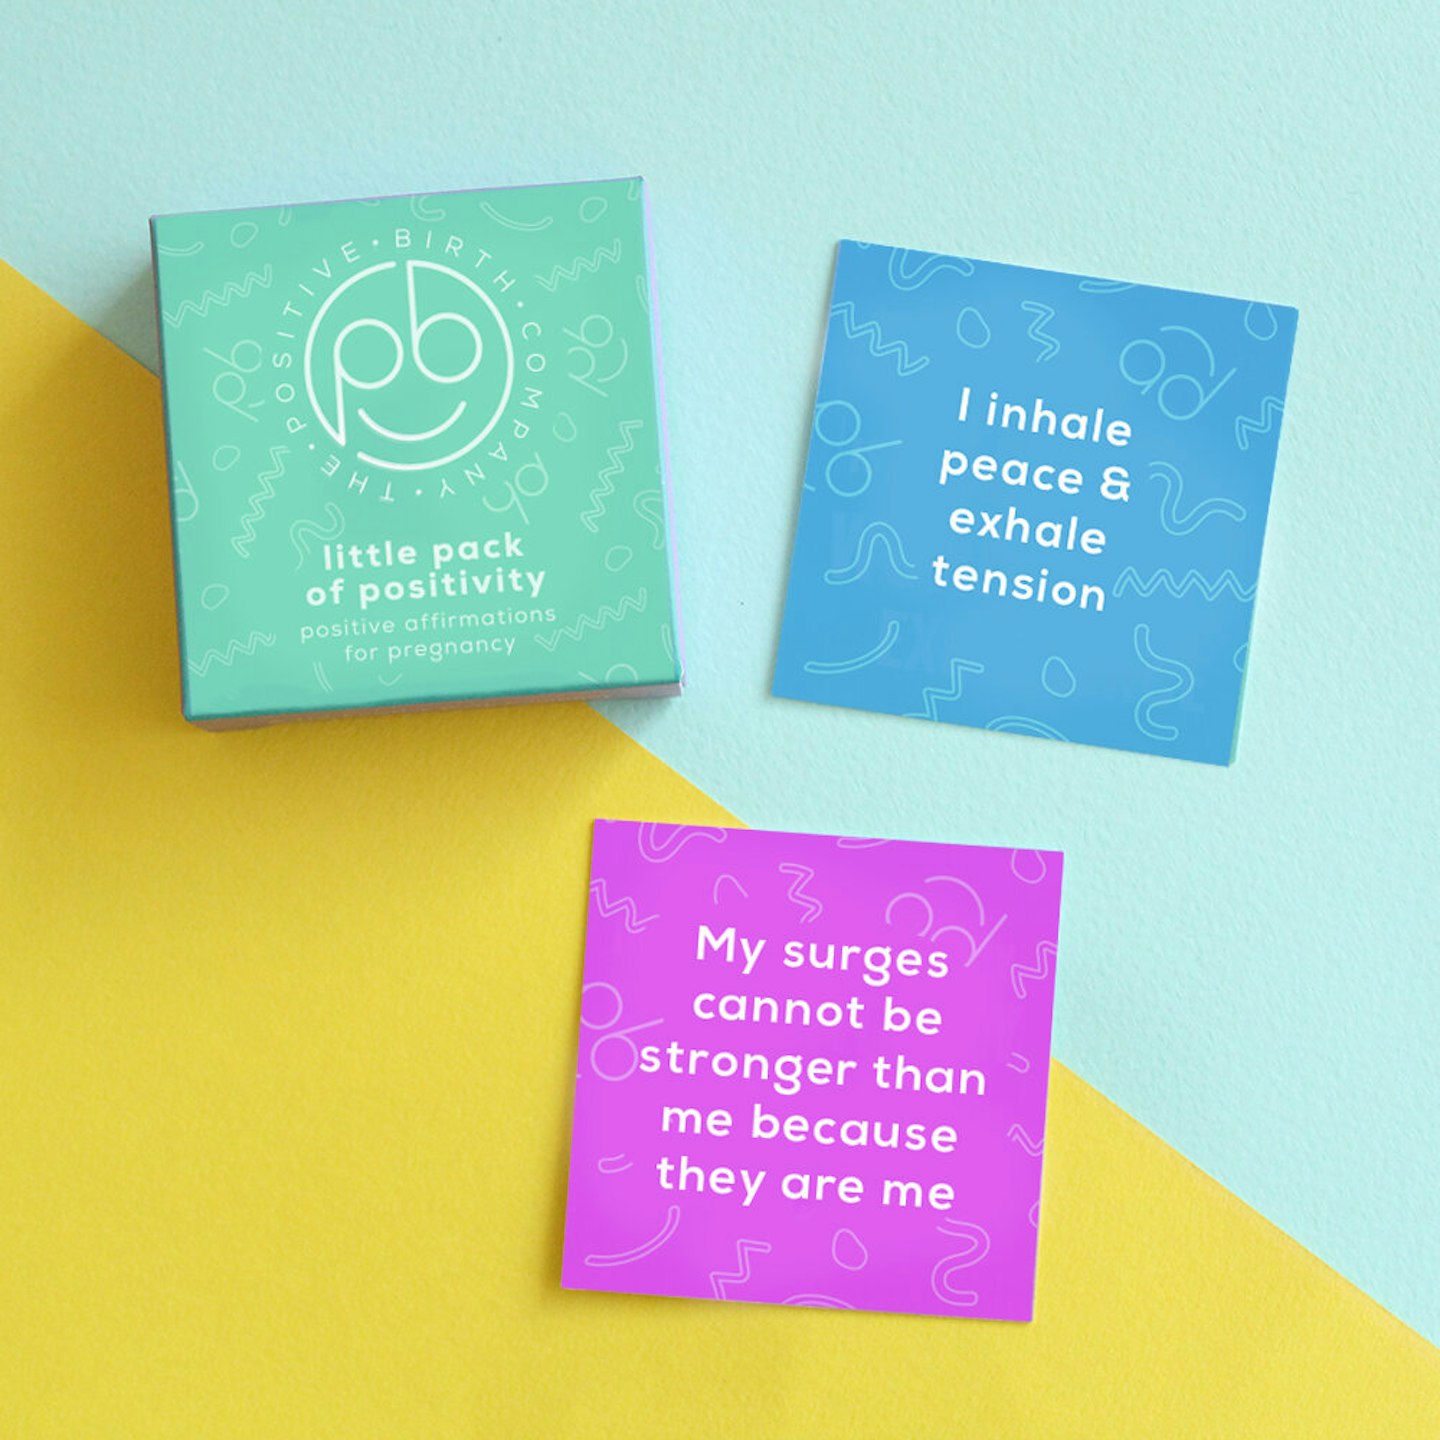 Little Pack Of Positivity- Affirmation Cards for Pregnancy & Birth